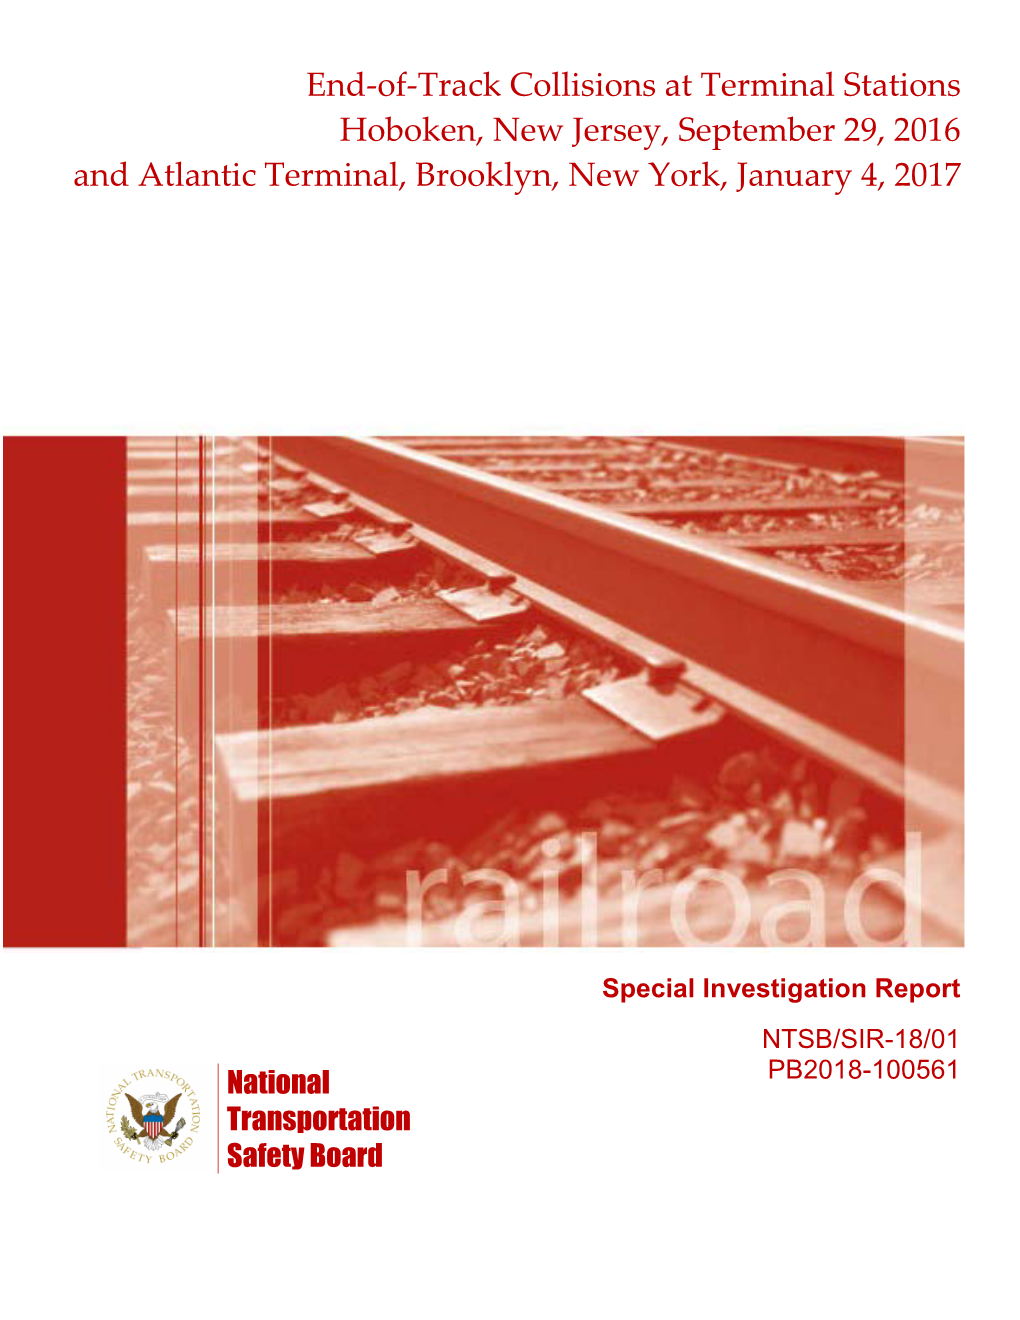 End-Of-Track Collisions at Terminal Stations Hoboken, New Jersey, September 29, 2016 and Atlantic Terminal, Brooklyn, New York, January 4, 2017